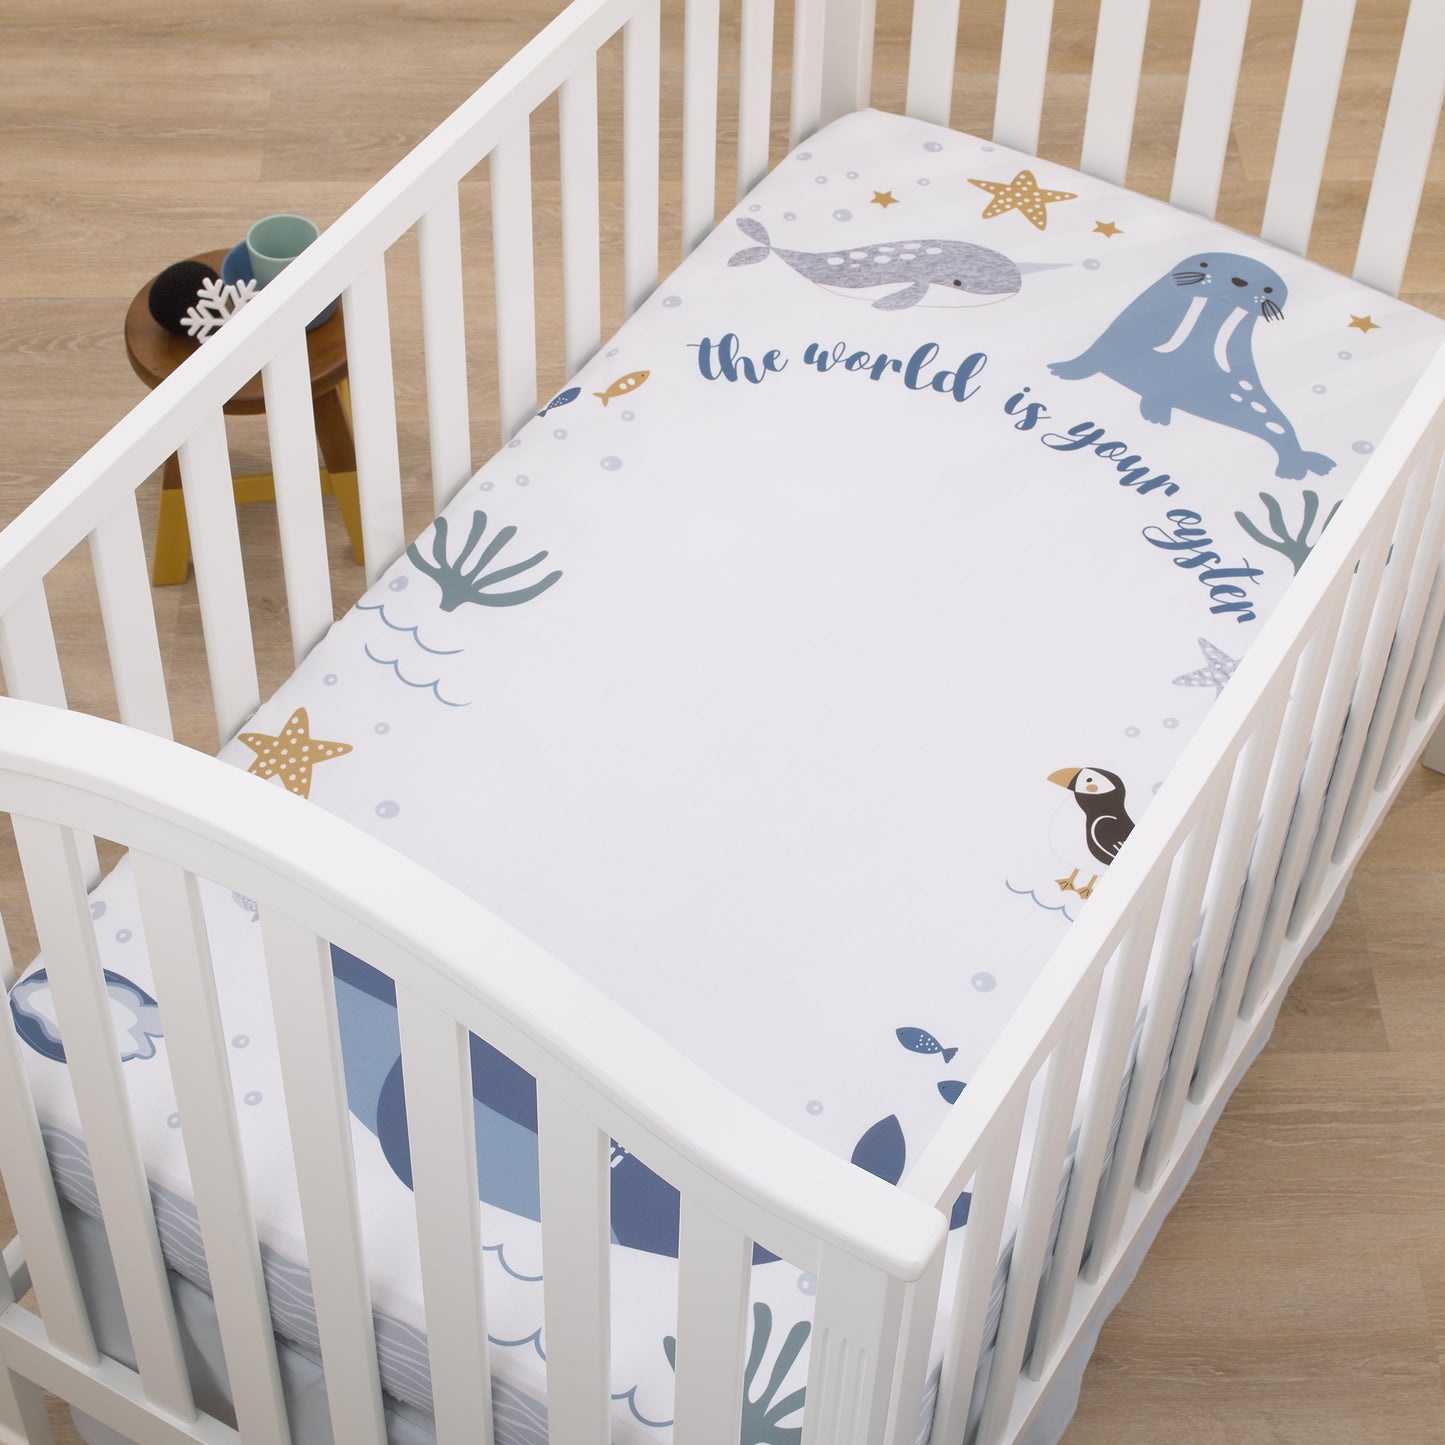 NoJo Arctic Adventure Light Blue, White, and Navy Whales, Narwhal, and Walrus "The World is your Oyster" 100% Cotton Photo Op Fitted Crib Sheet